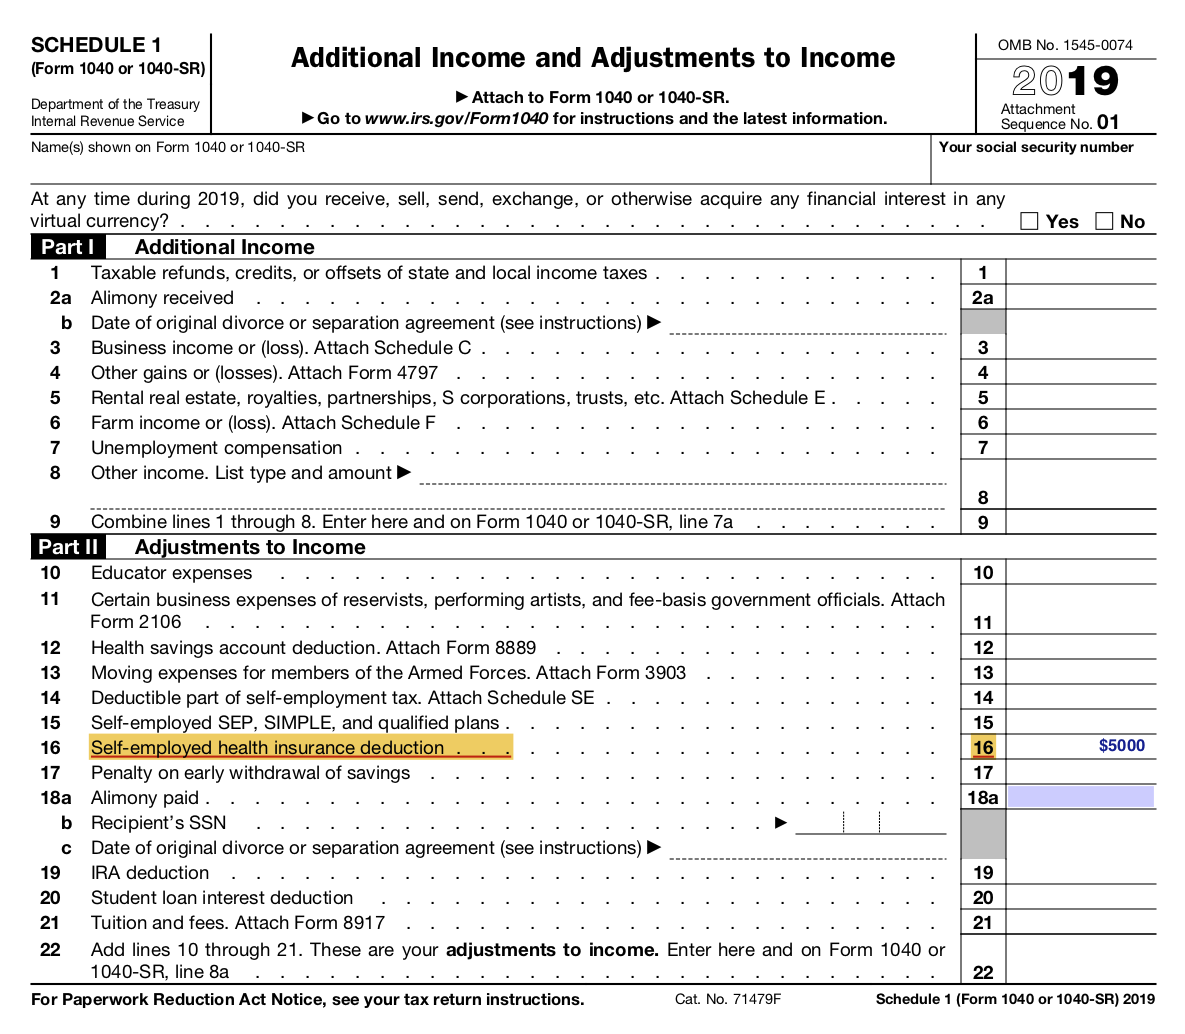 pre-tax-deductions-and-contributions-definition-list-example